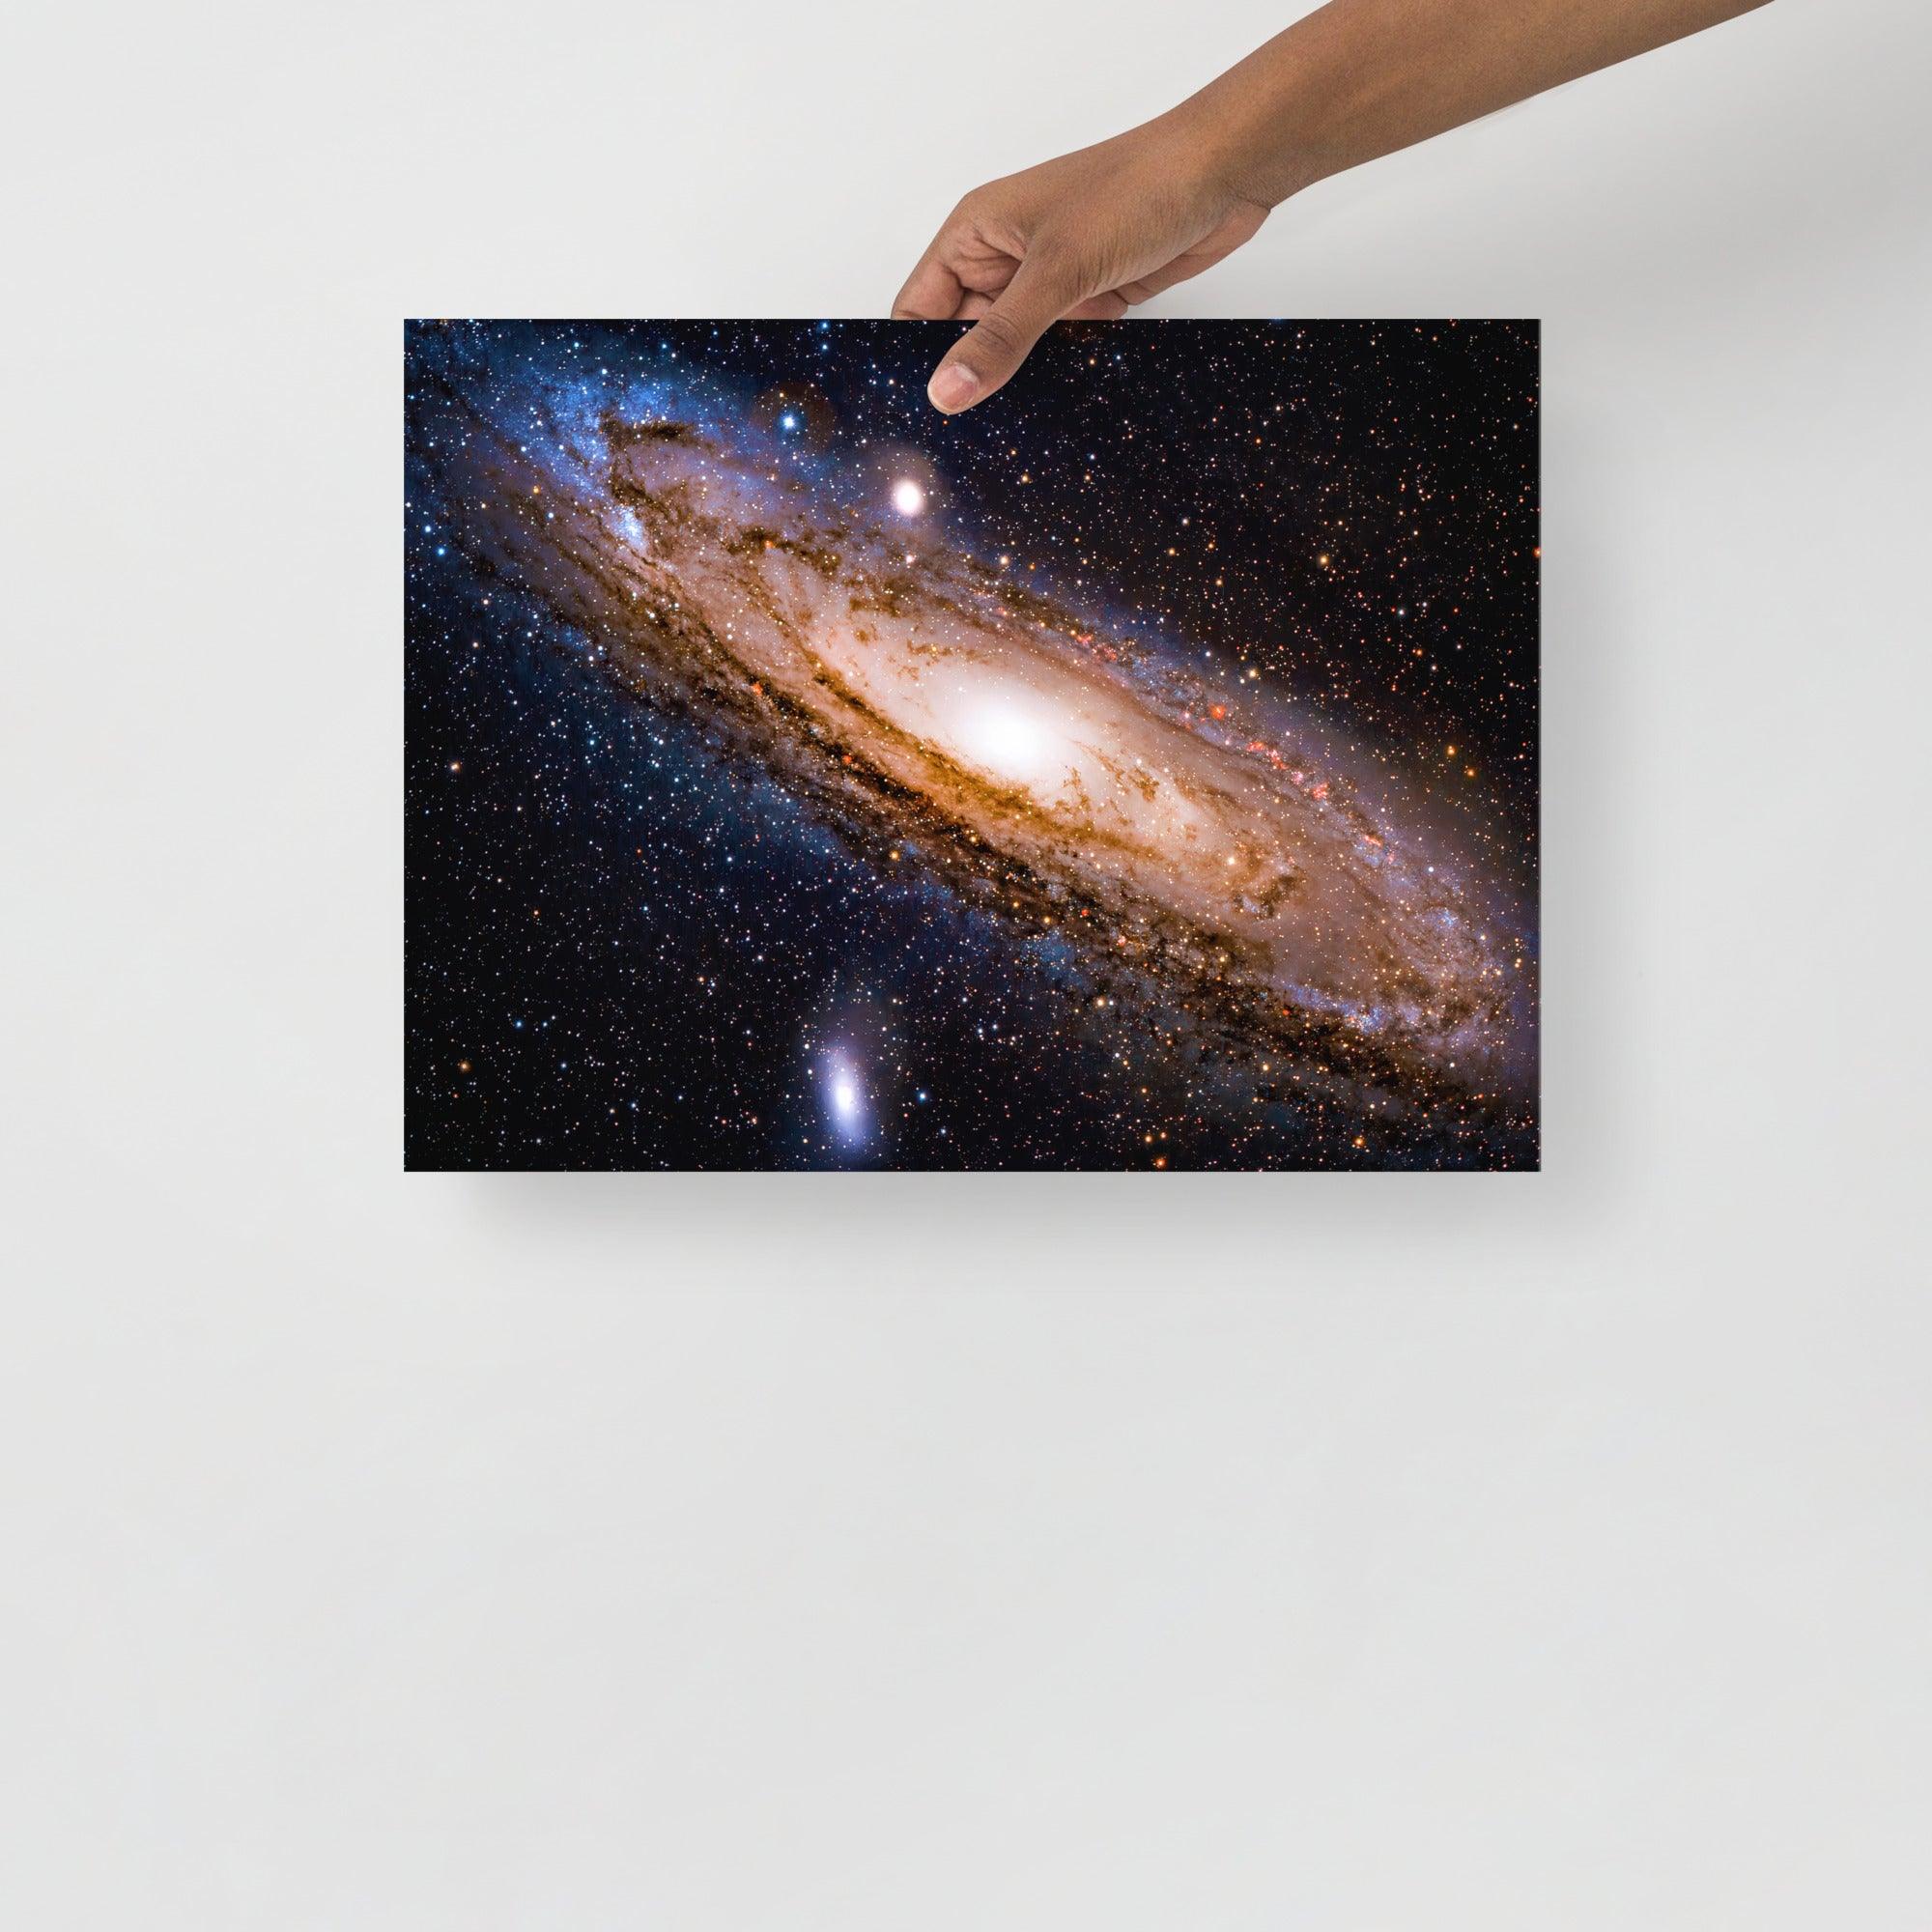 An Andromeda Galaxy poster on a plain backdrop in size 12x16”.